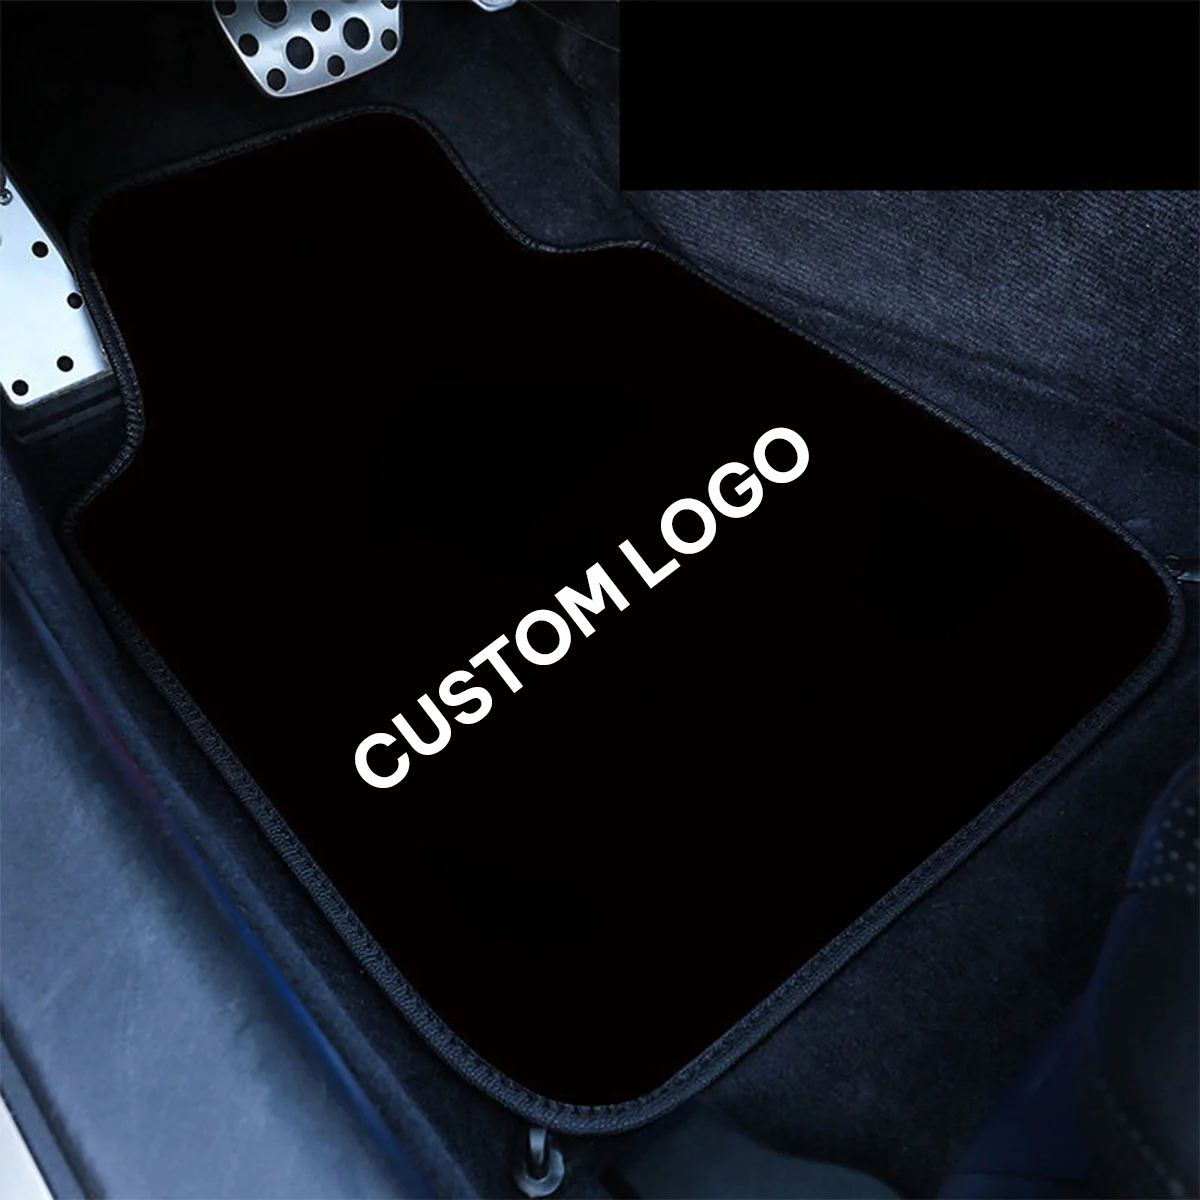 Custom Text For Carpet Floor Mats Set of 4pcs, Compatible with All Cars, Fit Car Floor Mats, All Weather Protection, Universal Type TY13984